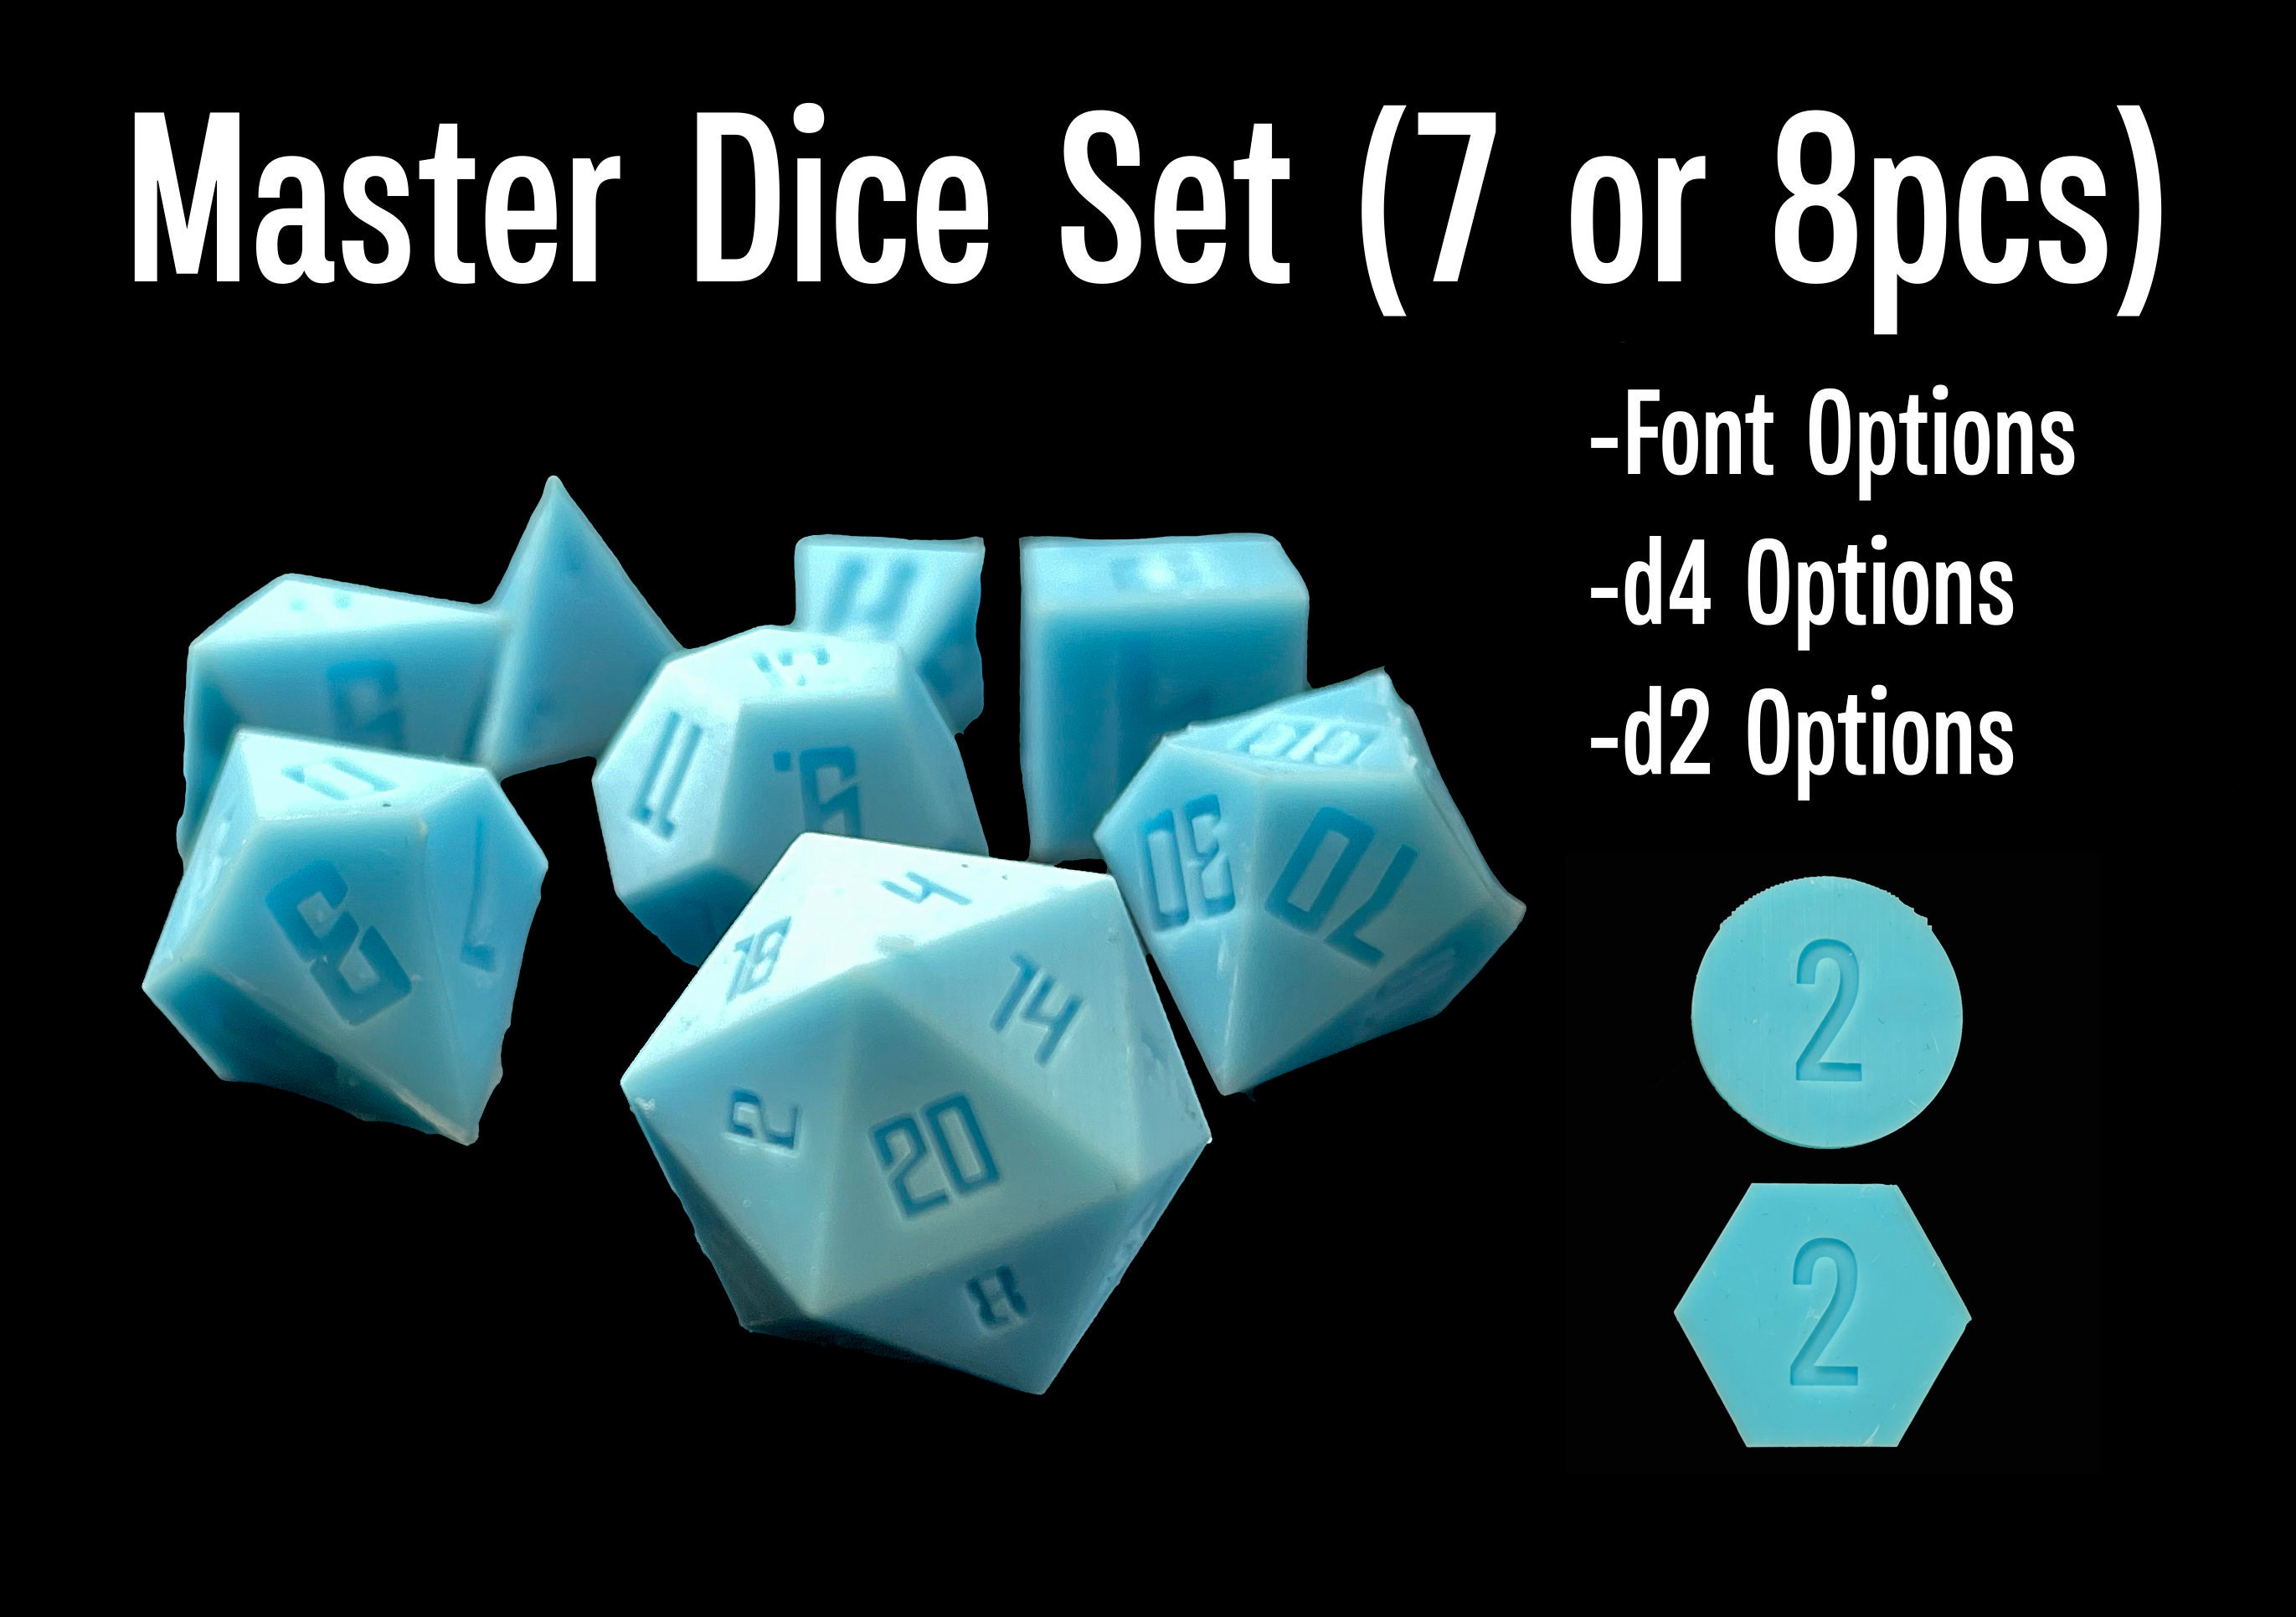 Dnd Dice Set Mold-3d Dice Resin Mold-d20 TTRPG Polyhedral Sharp Edge Dice  Mold-dungeons and Dragons Dice Mold-tabletop Gaming Dice Mold 